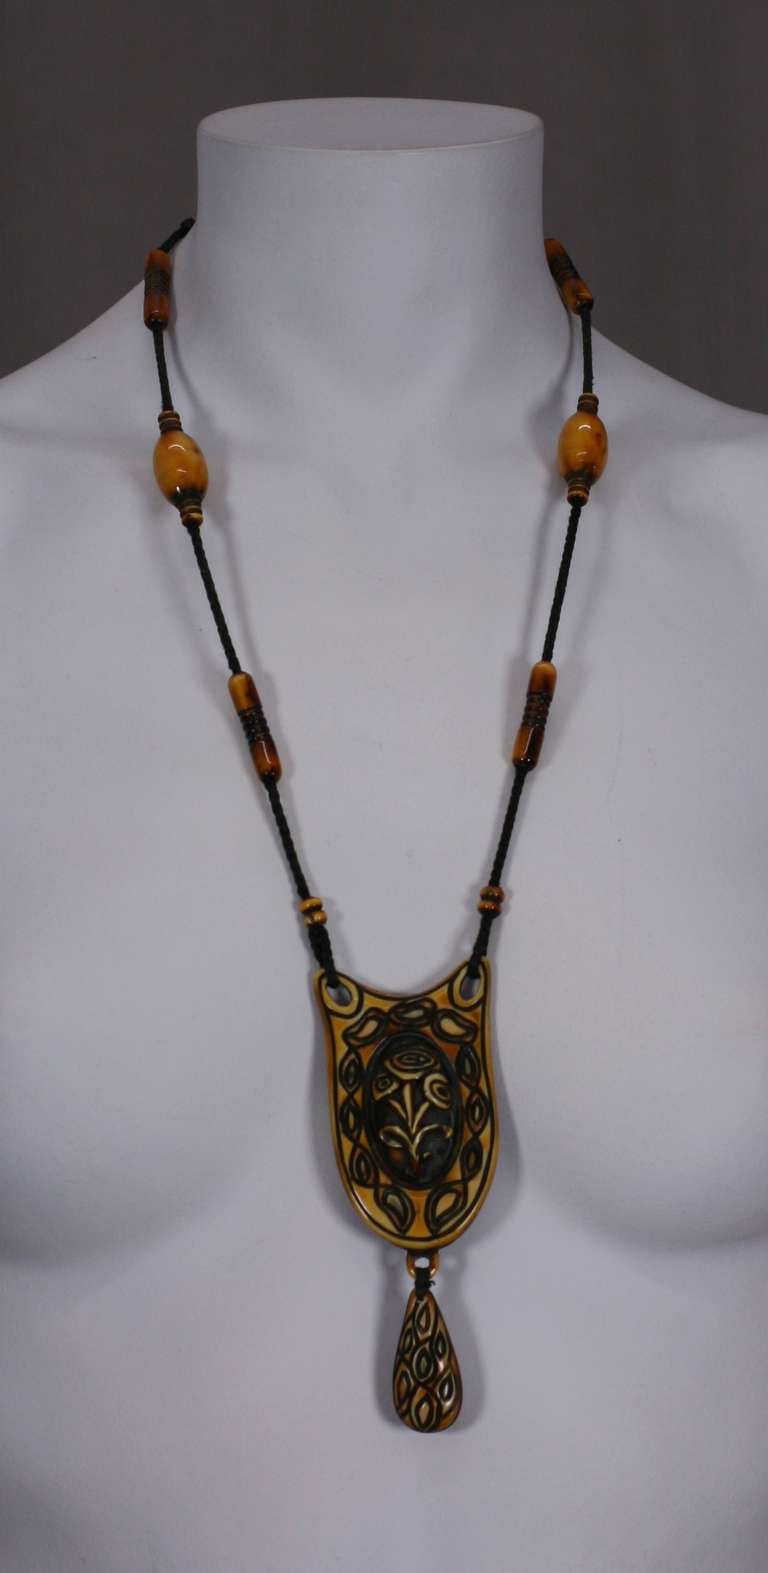 Patinaed French Celluloid Flapper Necklace In Excellent Condition For Sale In New York, NY